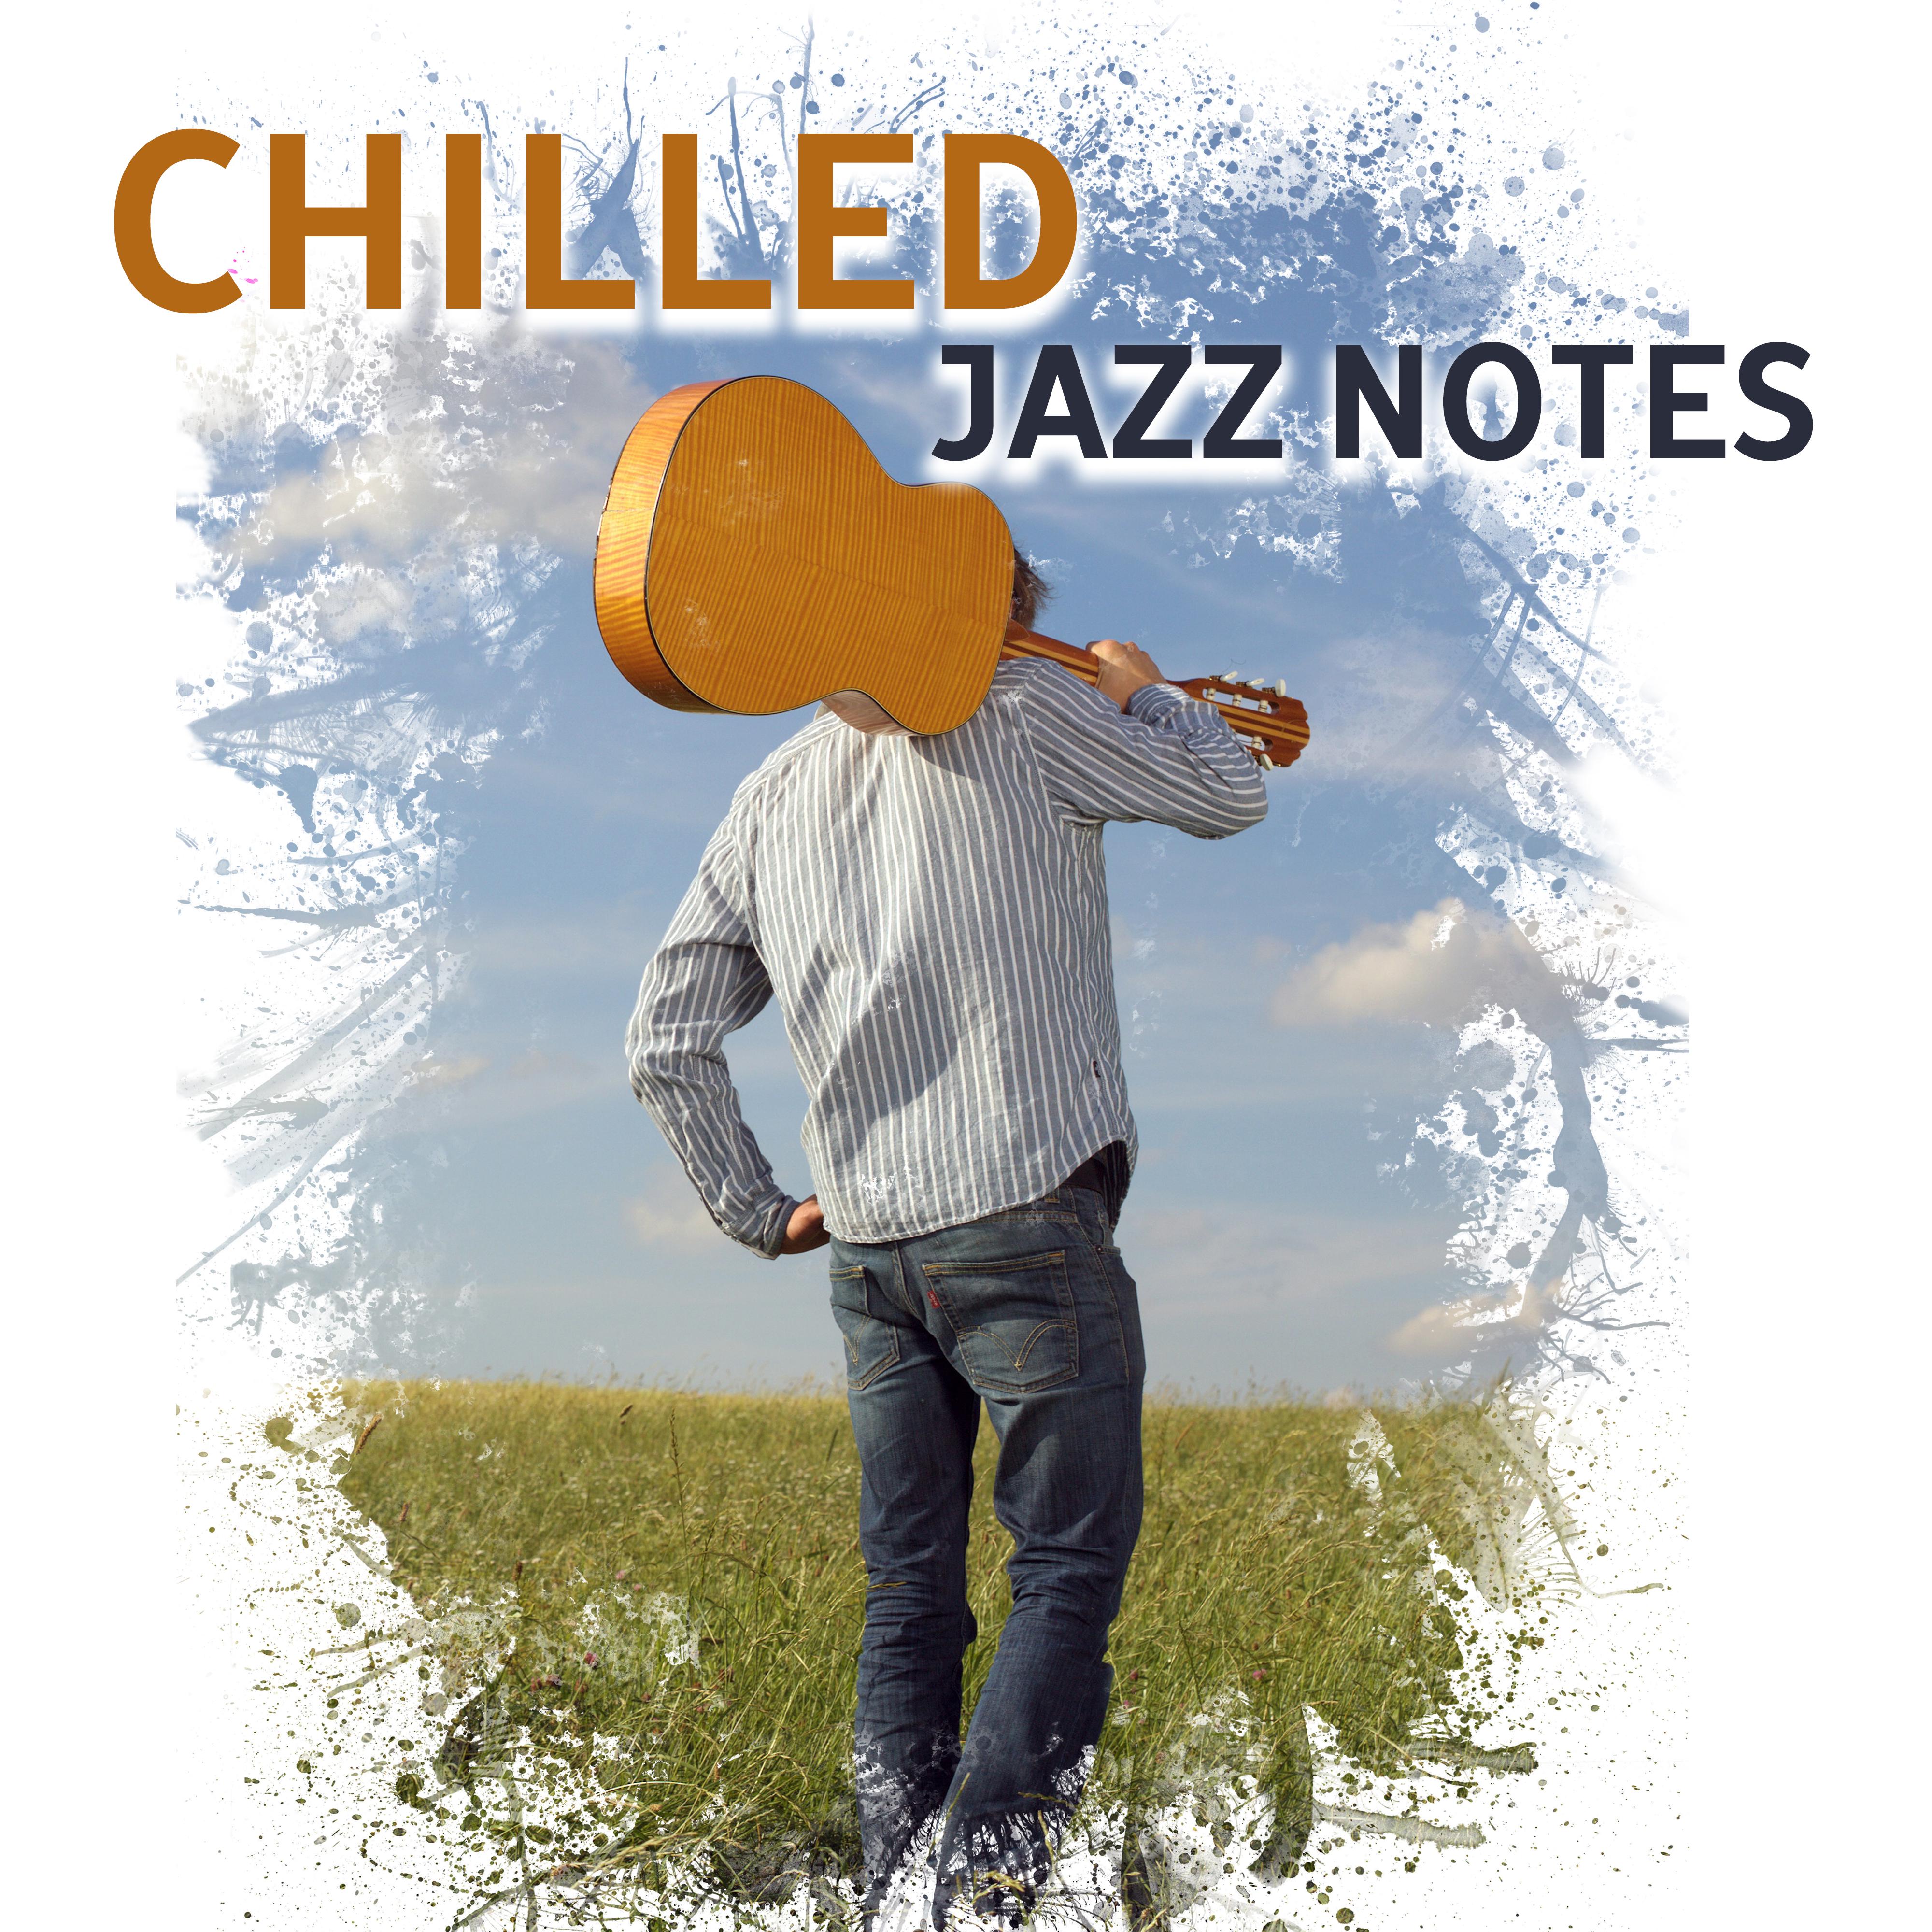 Chilled Jazz Notes  Relaxing Jazz Melodies, Smooth Jazz 2017, Soft Instrumental Music